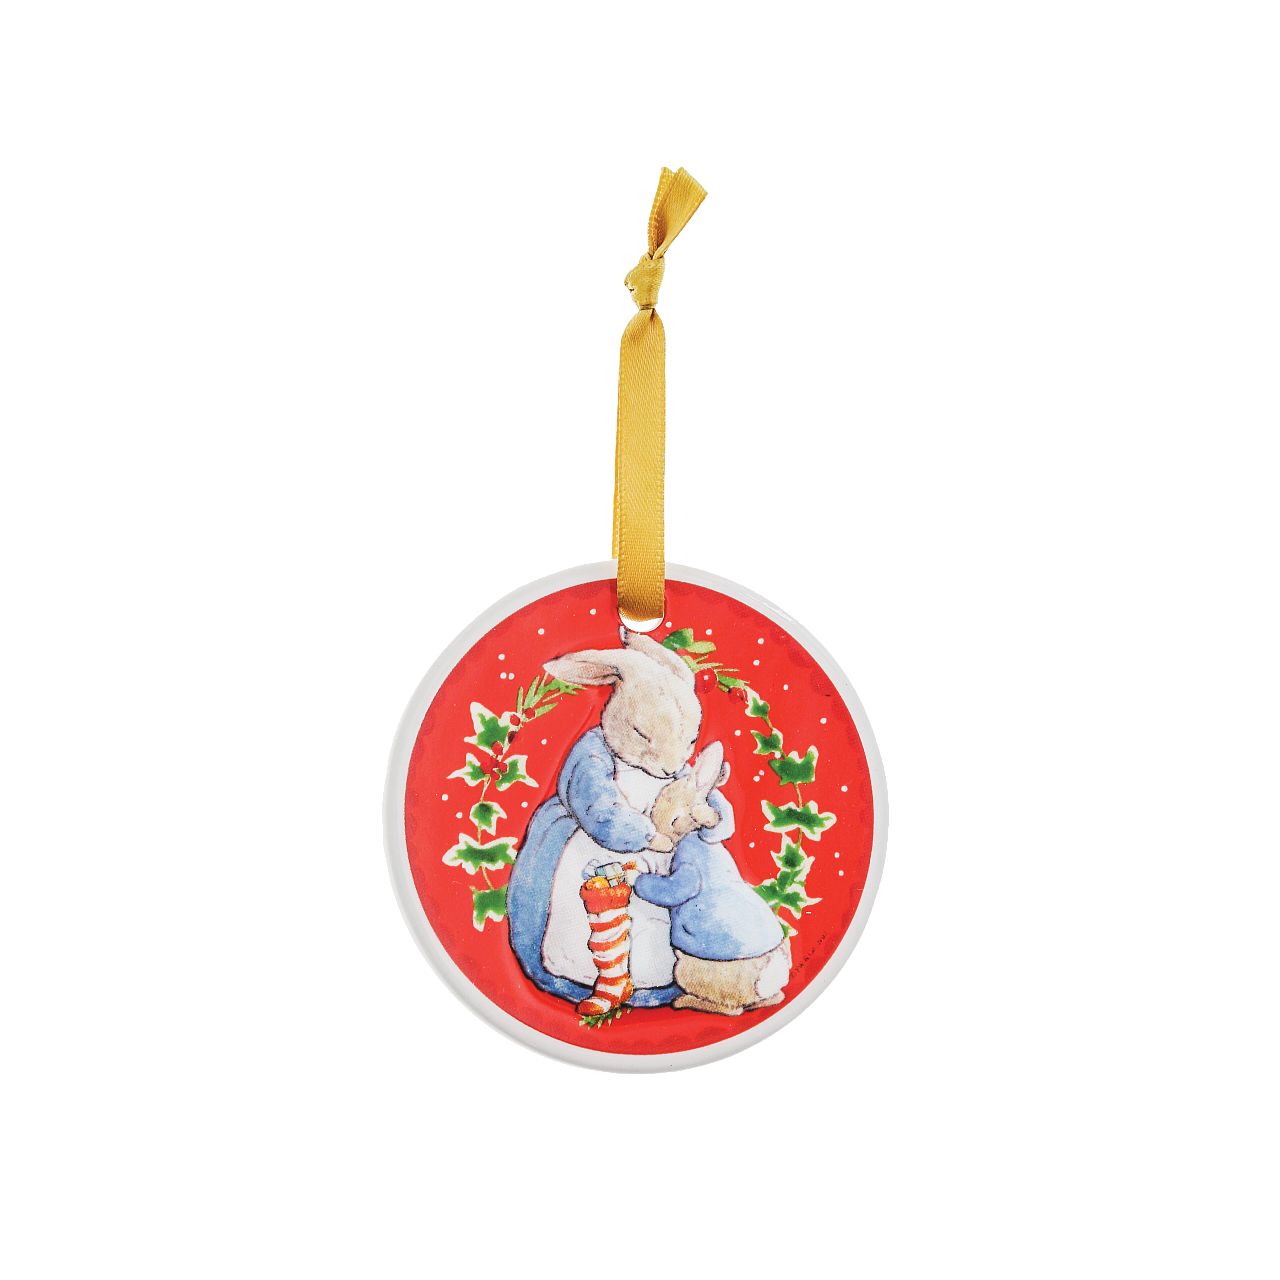 Beatrix Potter Peter Rabbit Ceramic Hanging Ornaments Set of 4  Peter Rabbit Hanging Ornaments with gold ribbon will add the spirit of Christmas to any household. With four different images, all from the original Beatrix Potter illustrations and stories, these Peter Rabbit Hanging Ornaments are extra special. Coming in a branded gift box, these make a great gift or self purchase.